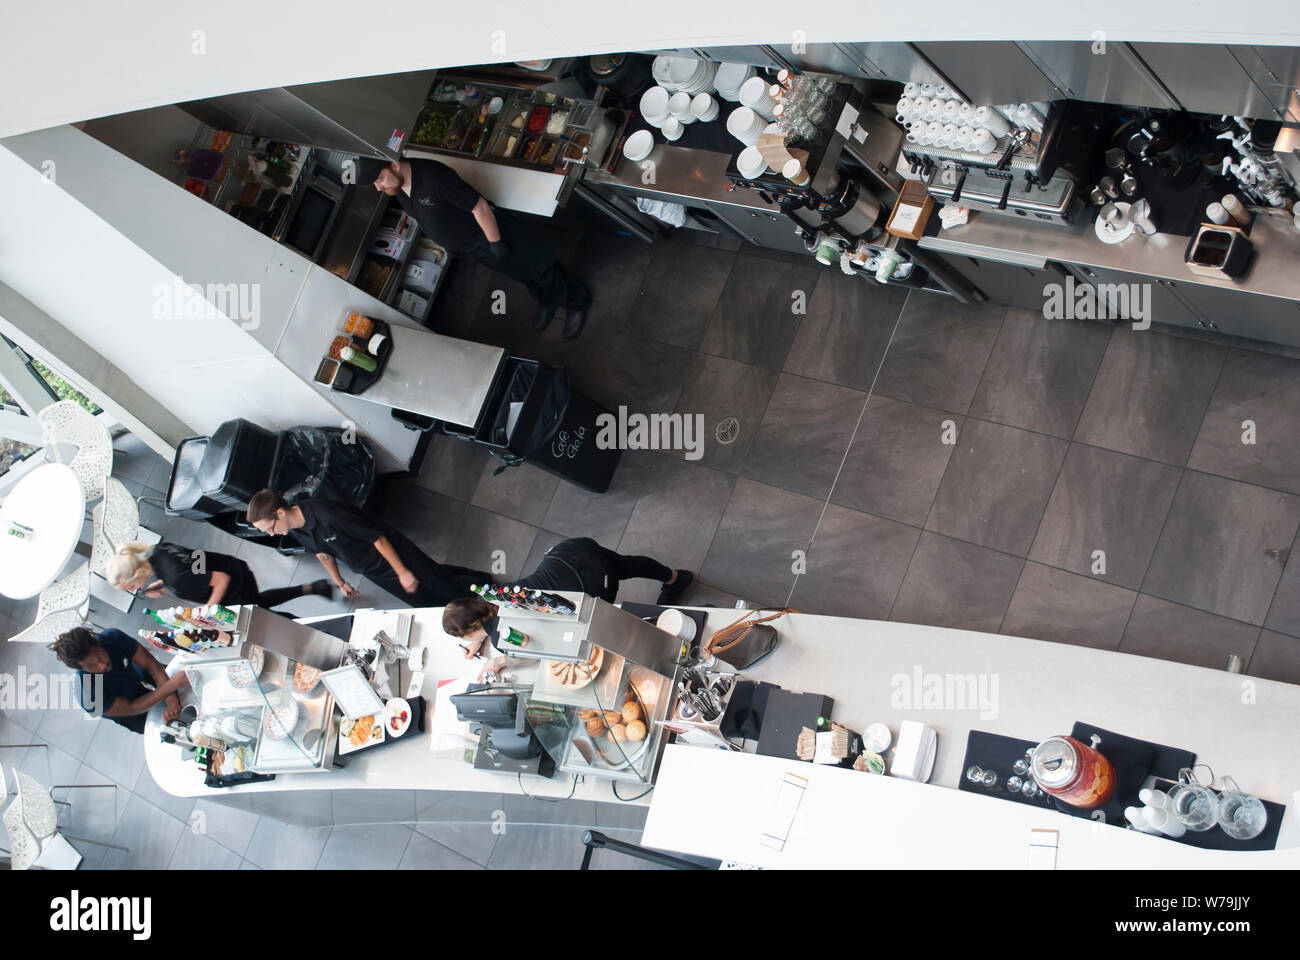 View from the top on the cafe/bar with people working Stock Photo